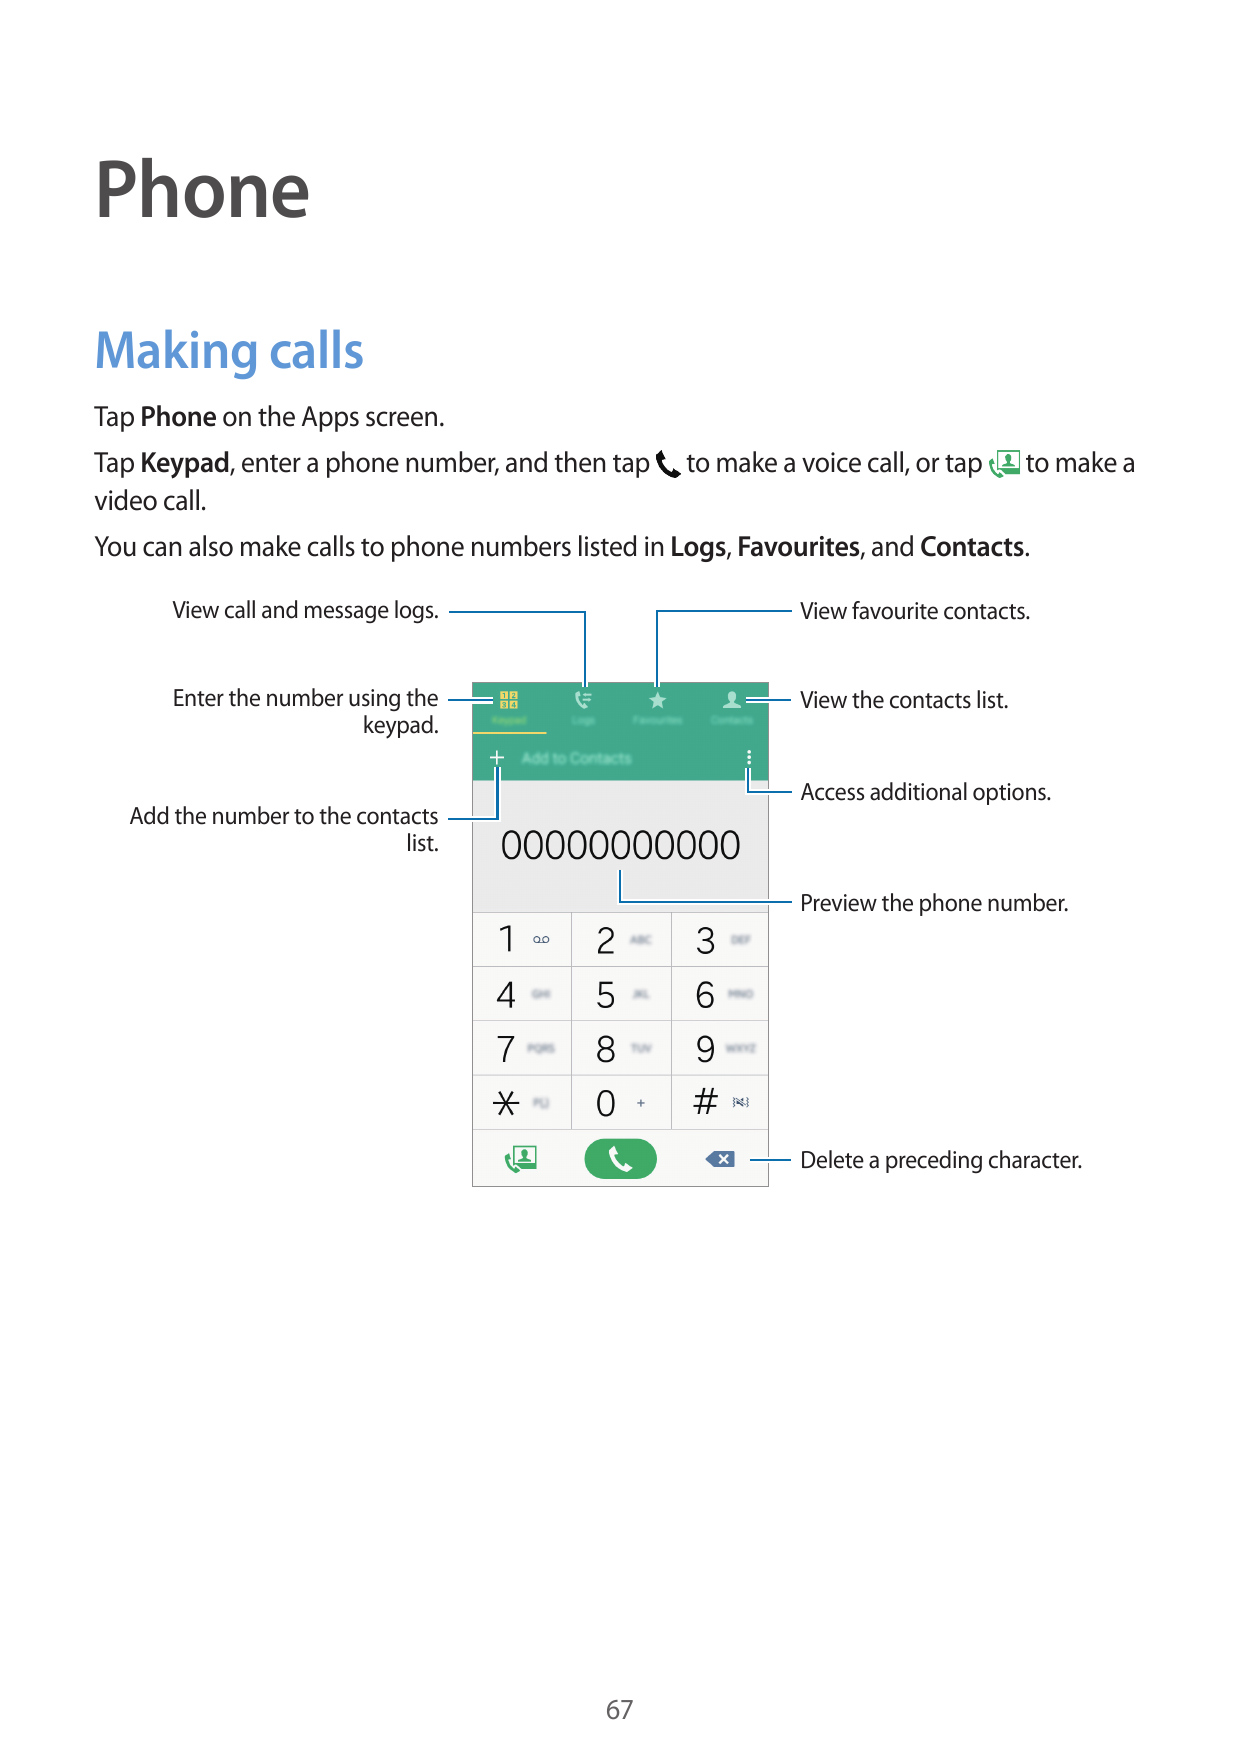 PhoneMaking callsTap Phone on the Apps screen.Tap Keypad, enter a phone number, and then tapvideo call.to make a voice call, or 